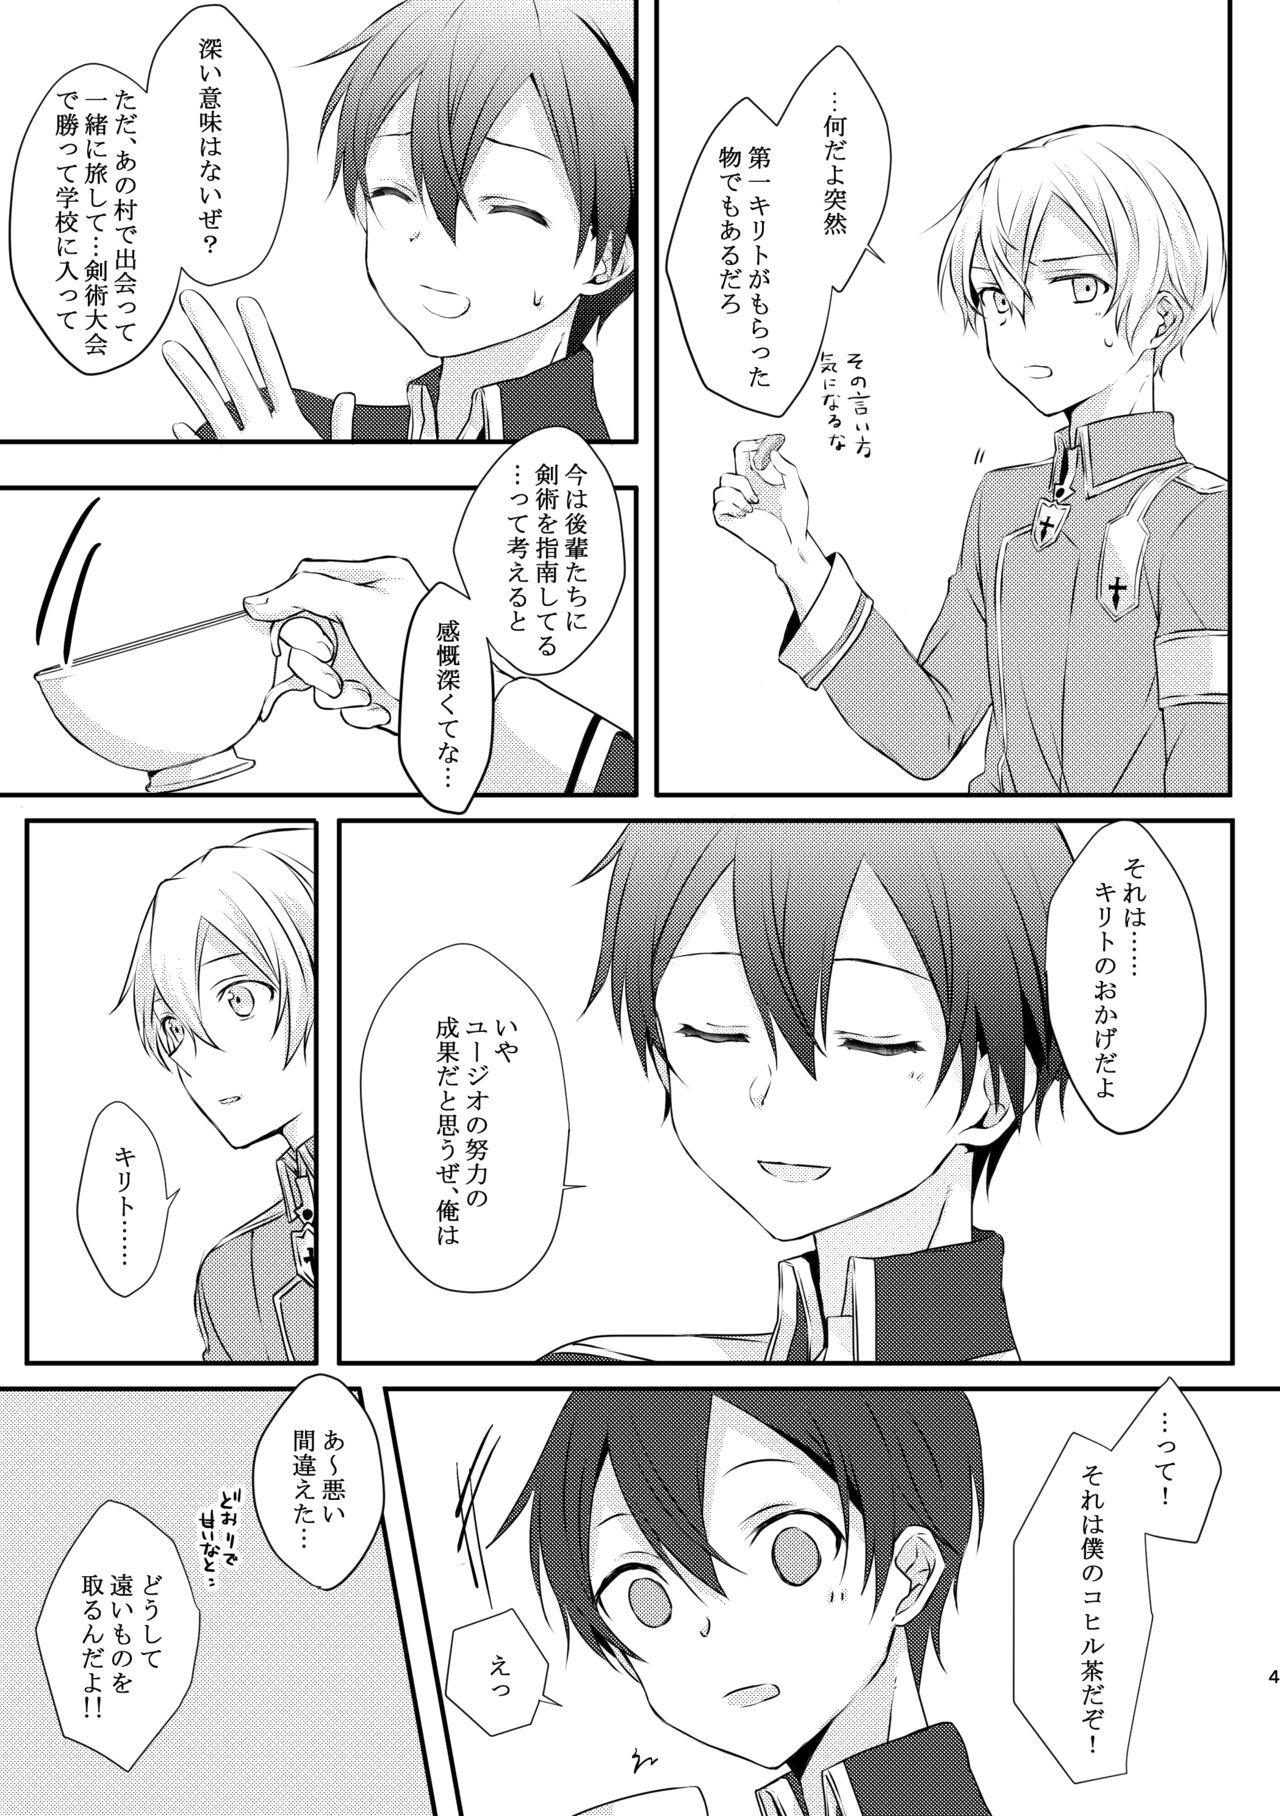 Para 触手ちゃんはユジキリが羨ましい！ - Sword art online Brother Sister - Page 3